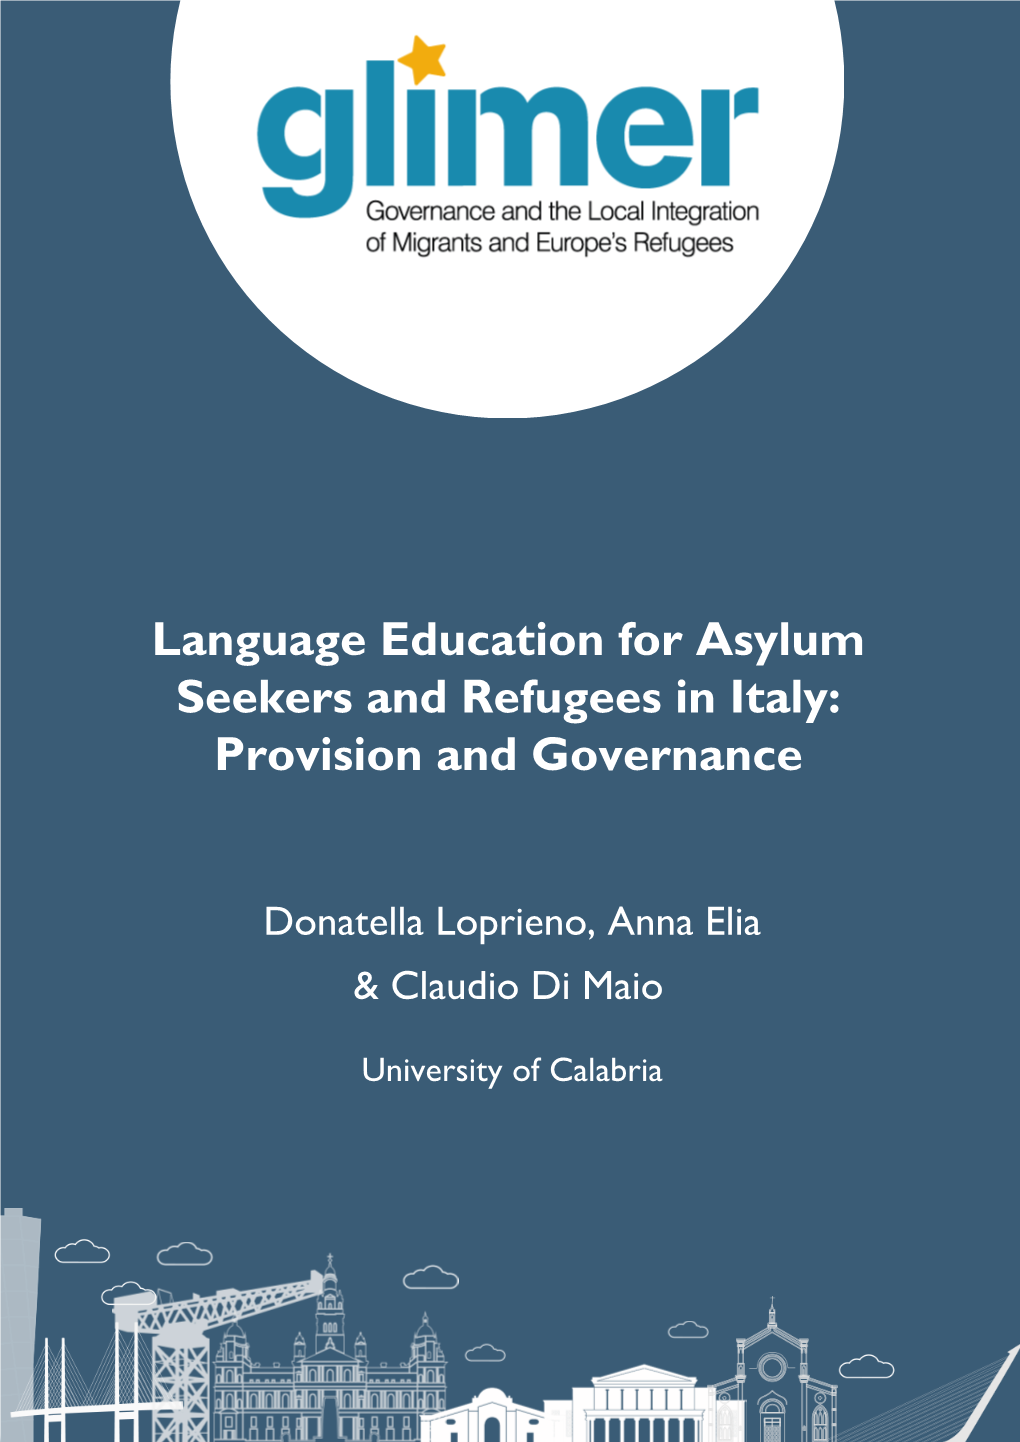 Language Education for Asylum Seekers and Refugees in Italy: Provision and Governance